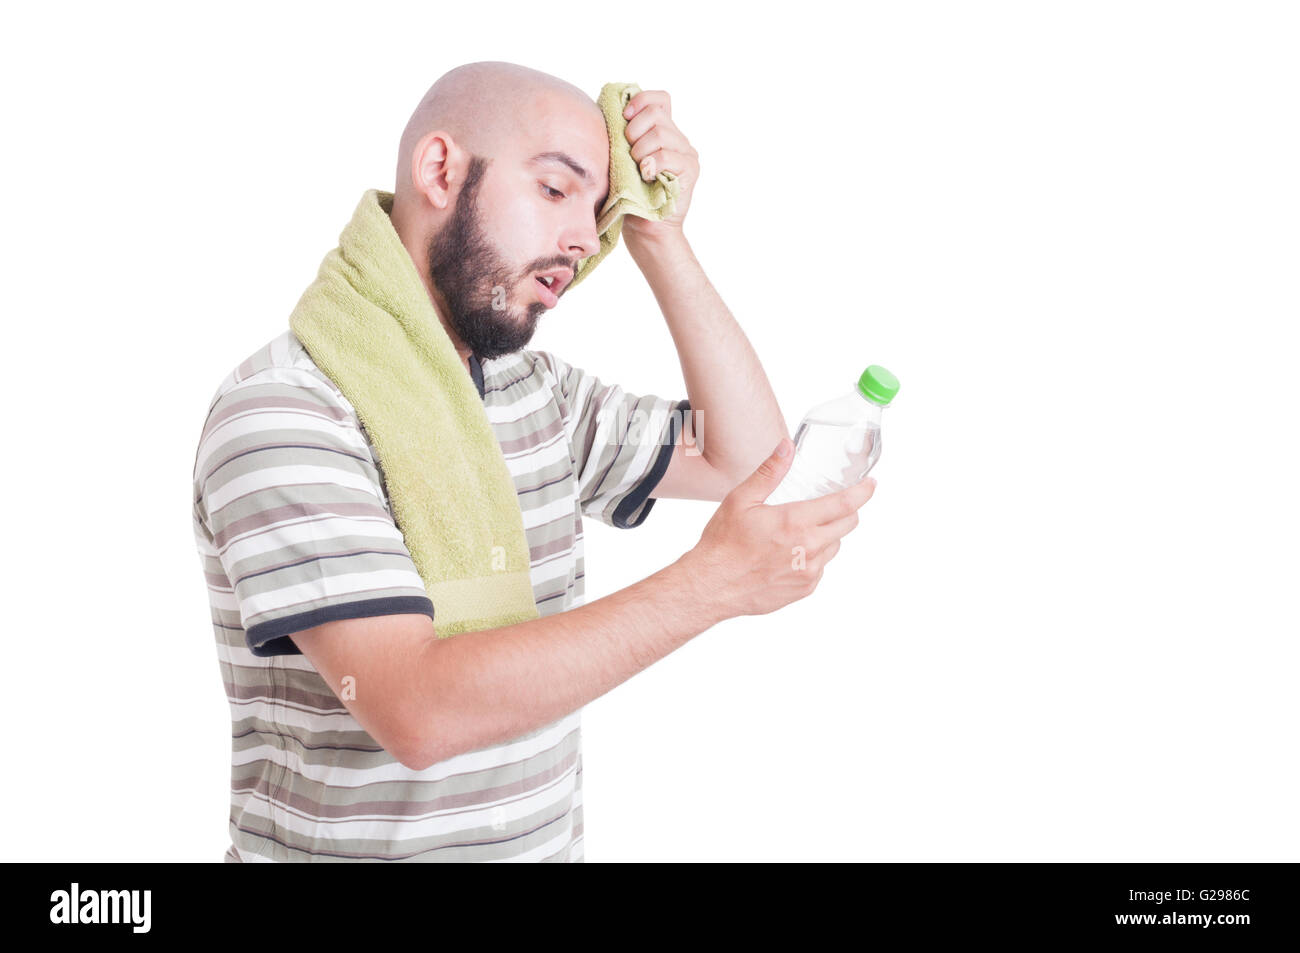 Dehydrated man wiping forehead and holding bottle of water isolated on white Stock Photo